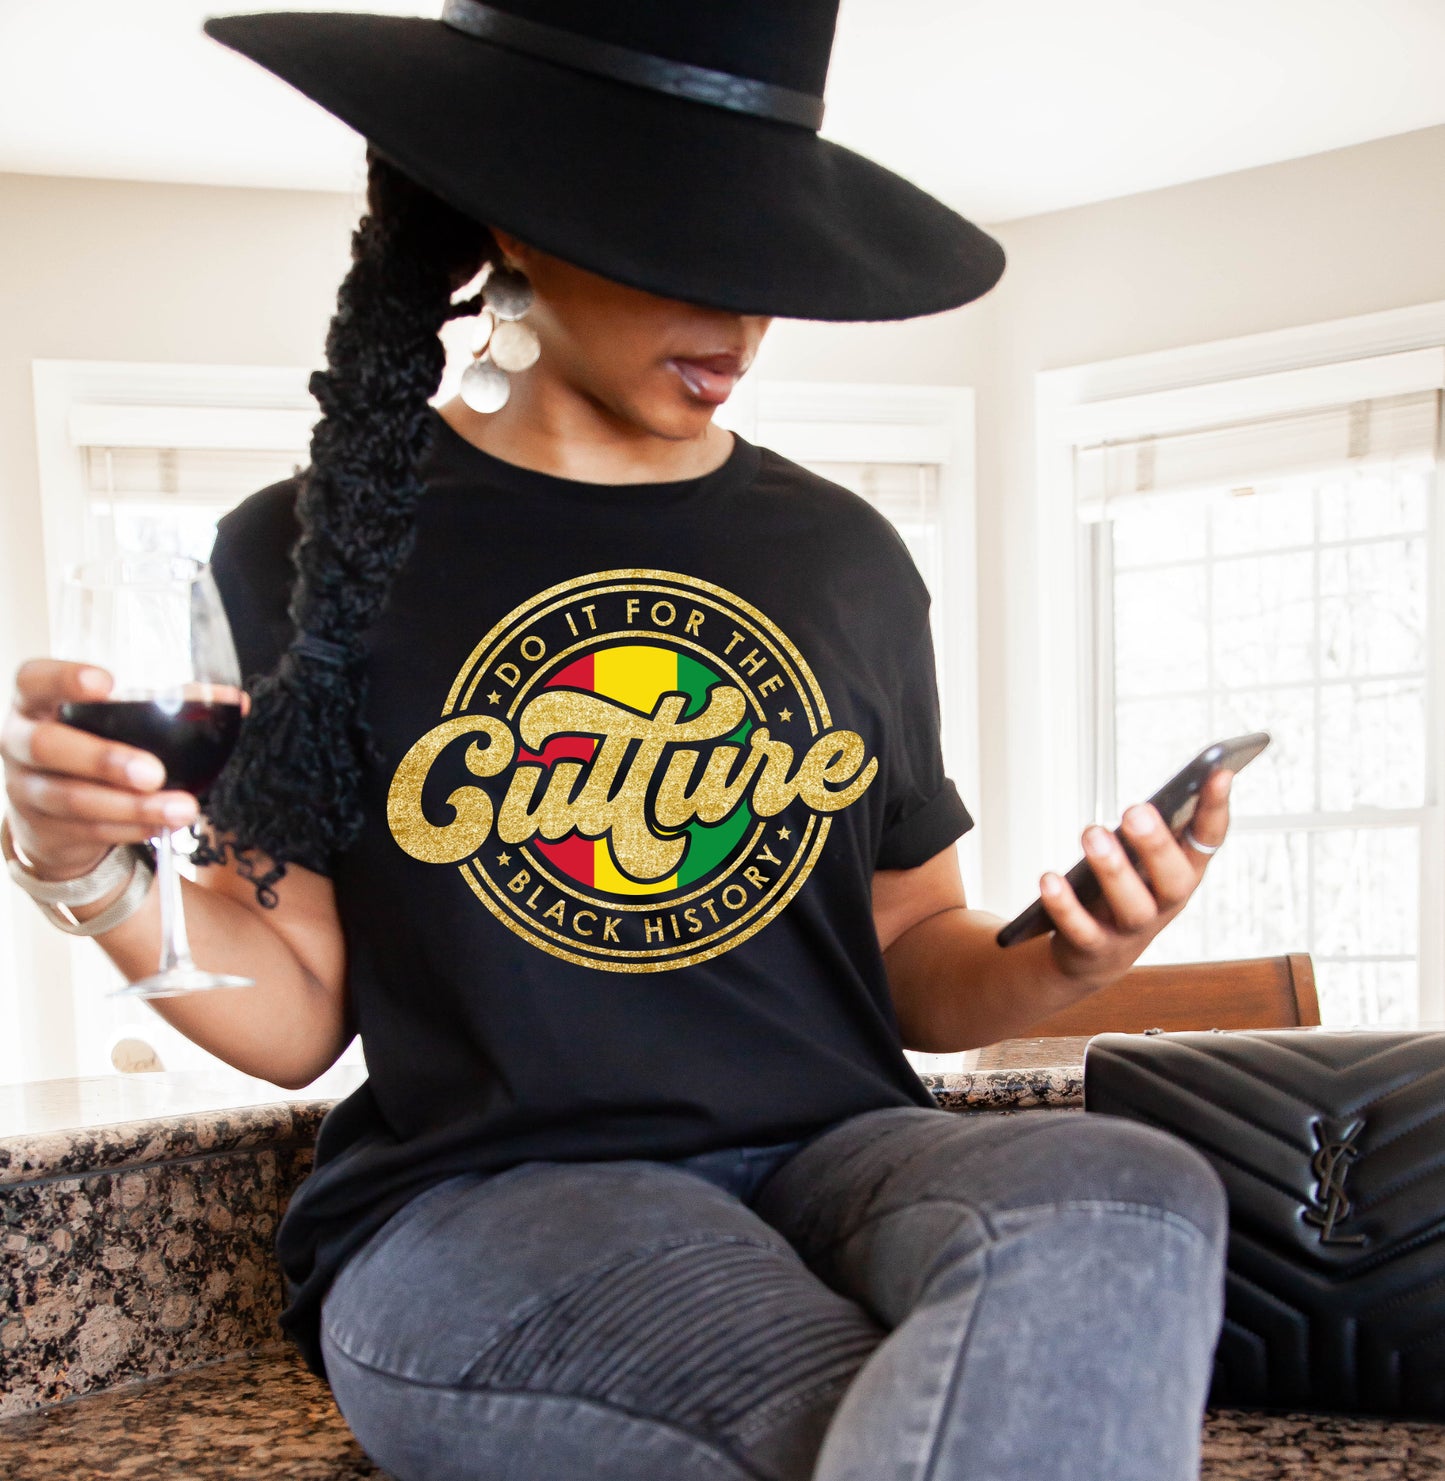 Do It For the Culture Black History Unisex T-shirt